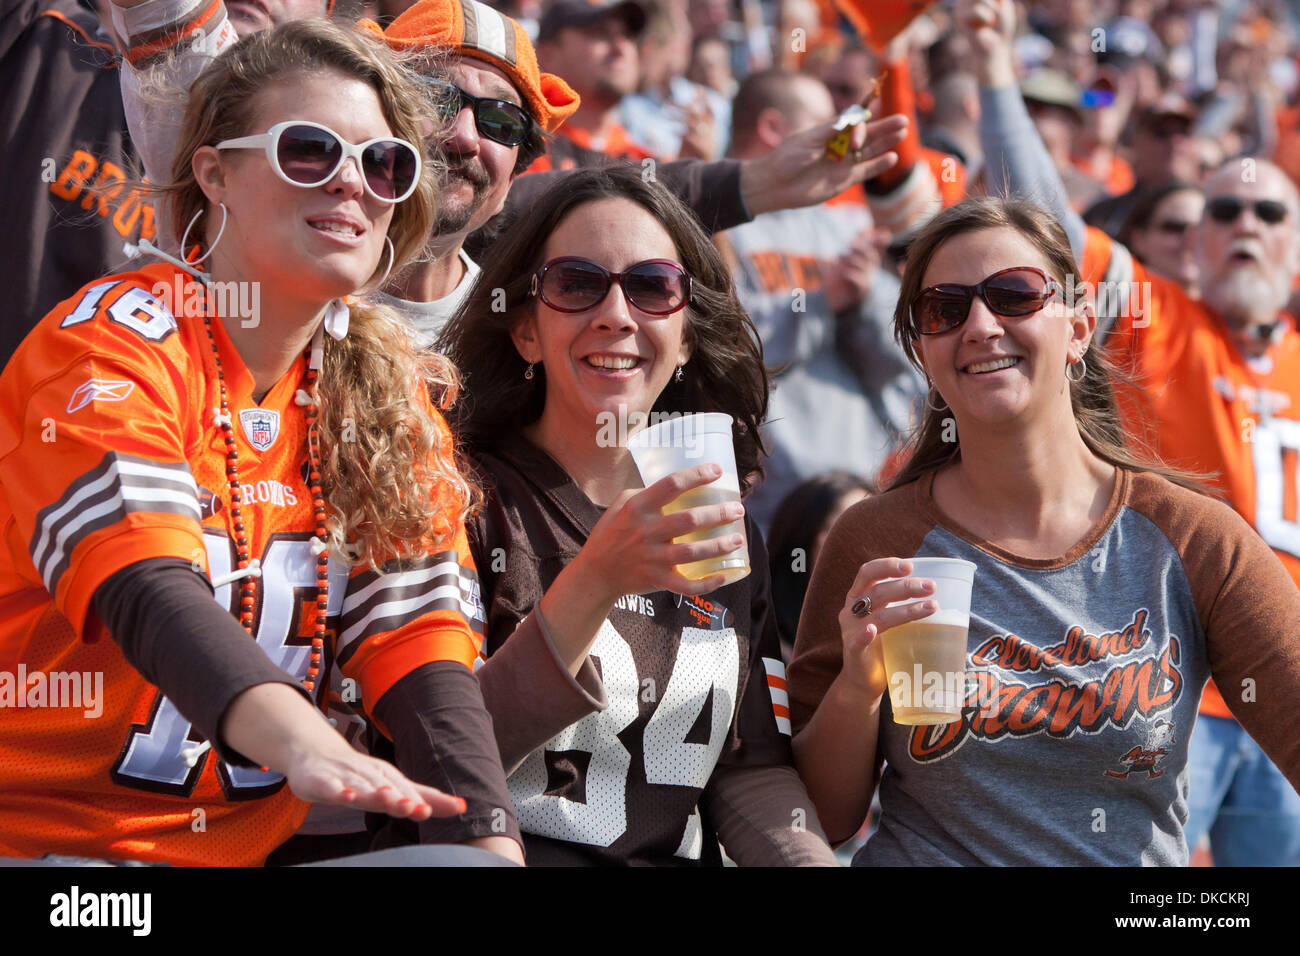 Oct. 23, 2011 - Cleveland, Ohio, U.S - Cleveland Browns fans in the stands during the game against Seattle.  The Cleveland Browns defeated the Seattle Seahawks 6-3 at Cleveland Browns Stadium in Cleveland, Ohio. (Credit Image: © Frank Jansky/Southcreek/ZUMAPRESS.com) Stock Photo